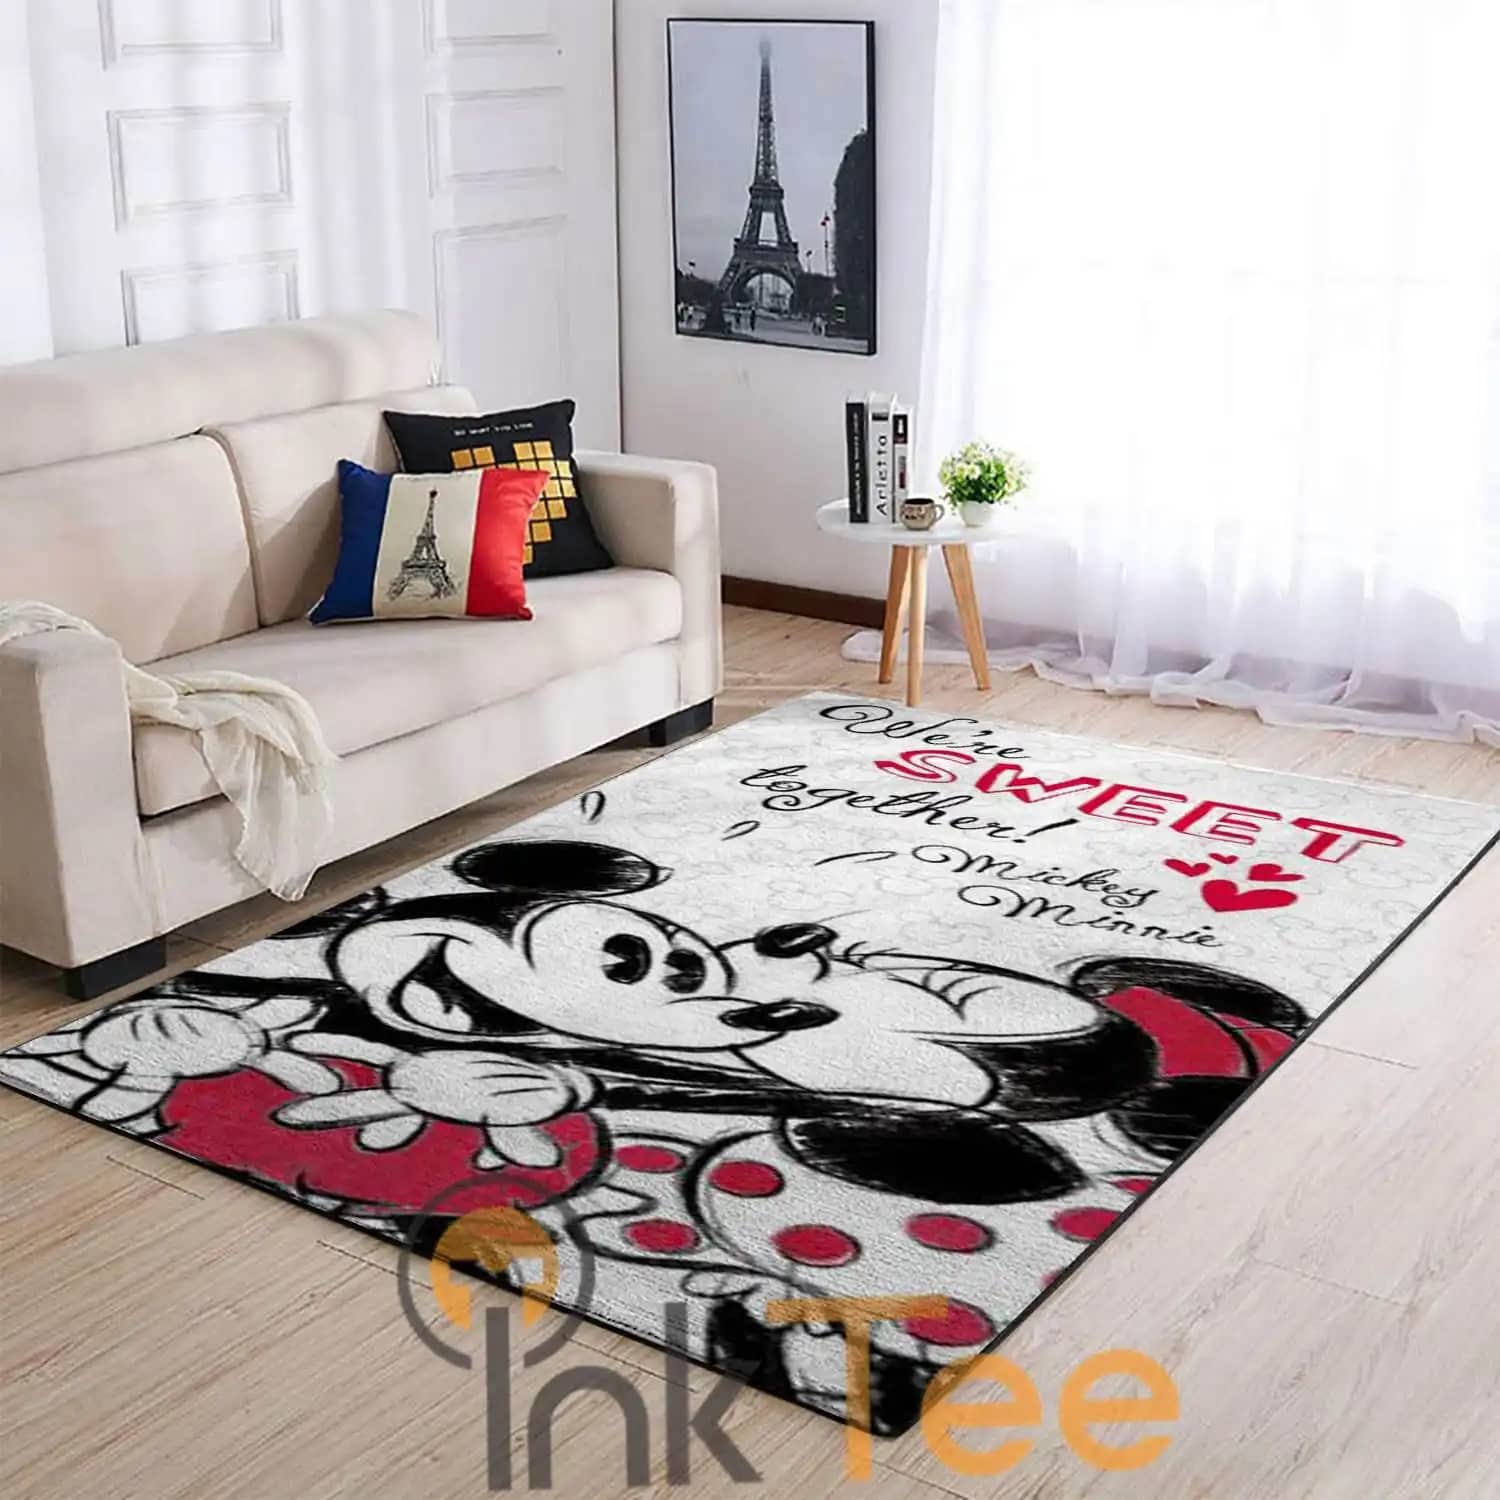 We're Sweet Together Minnie And Mickey Mouse Living Room 5000 Rug